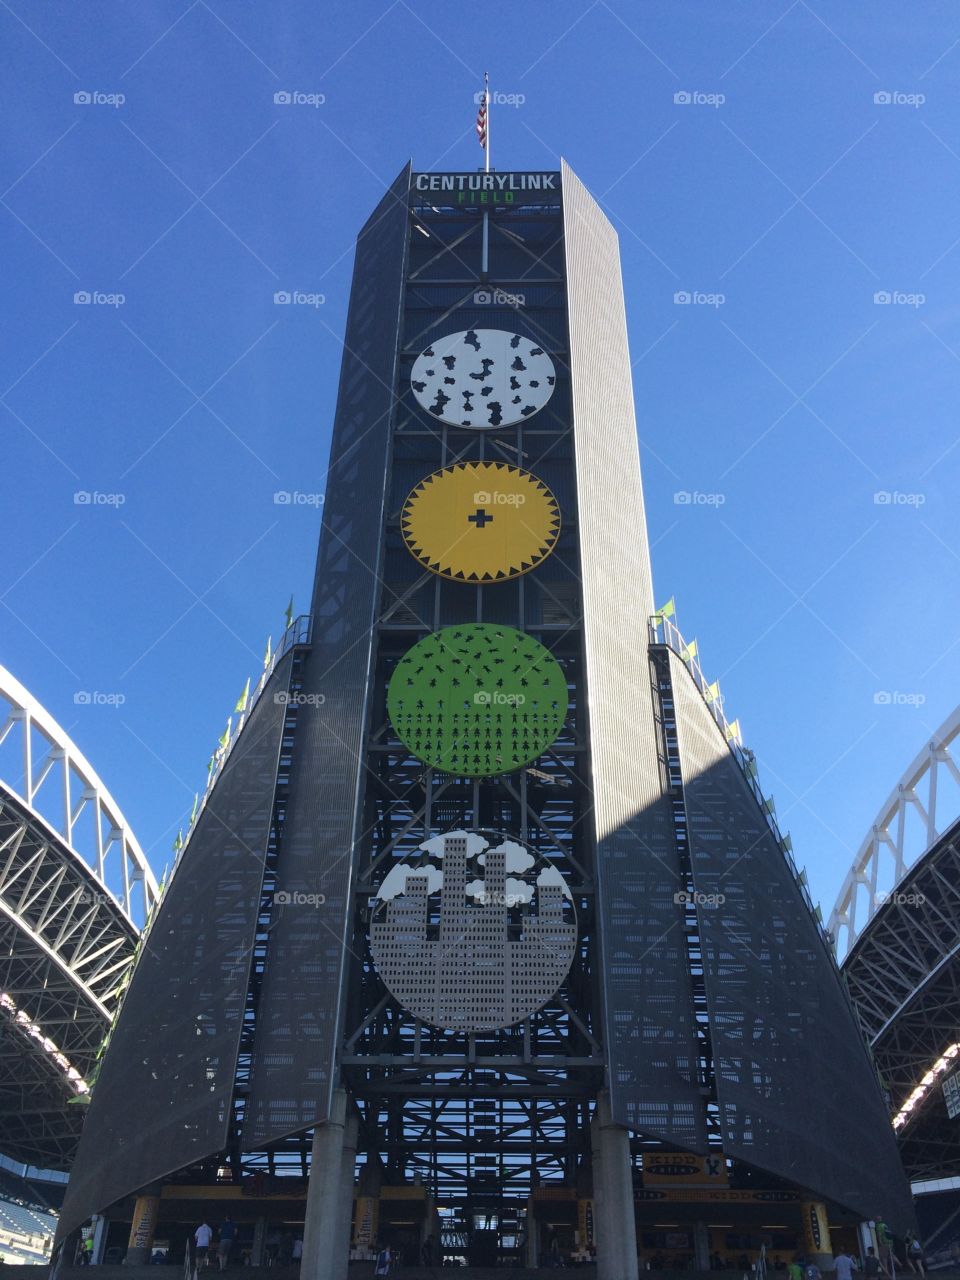 Looking up at the Century Link field in Seattle.